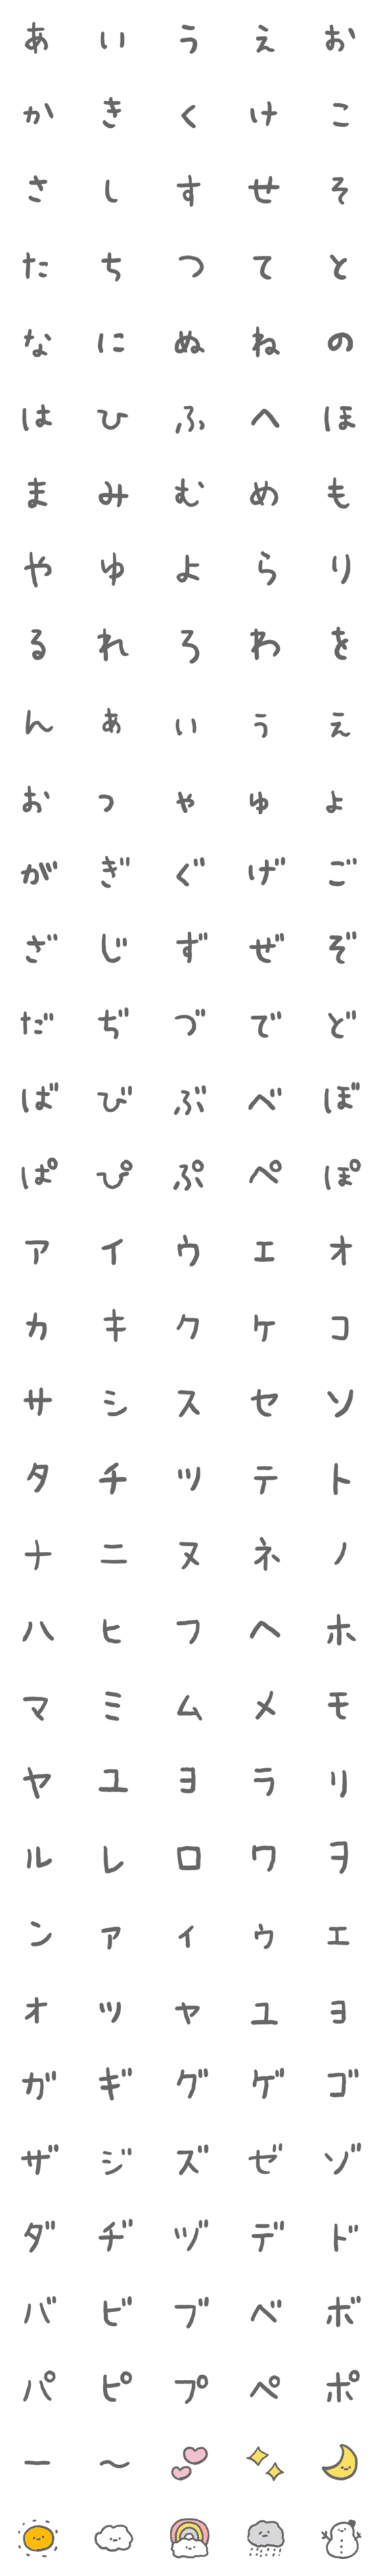 [LINE絵文字]ゆる〜い文字の画像一覧